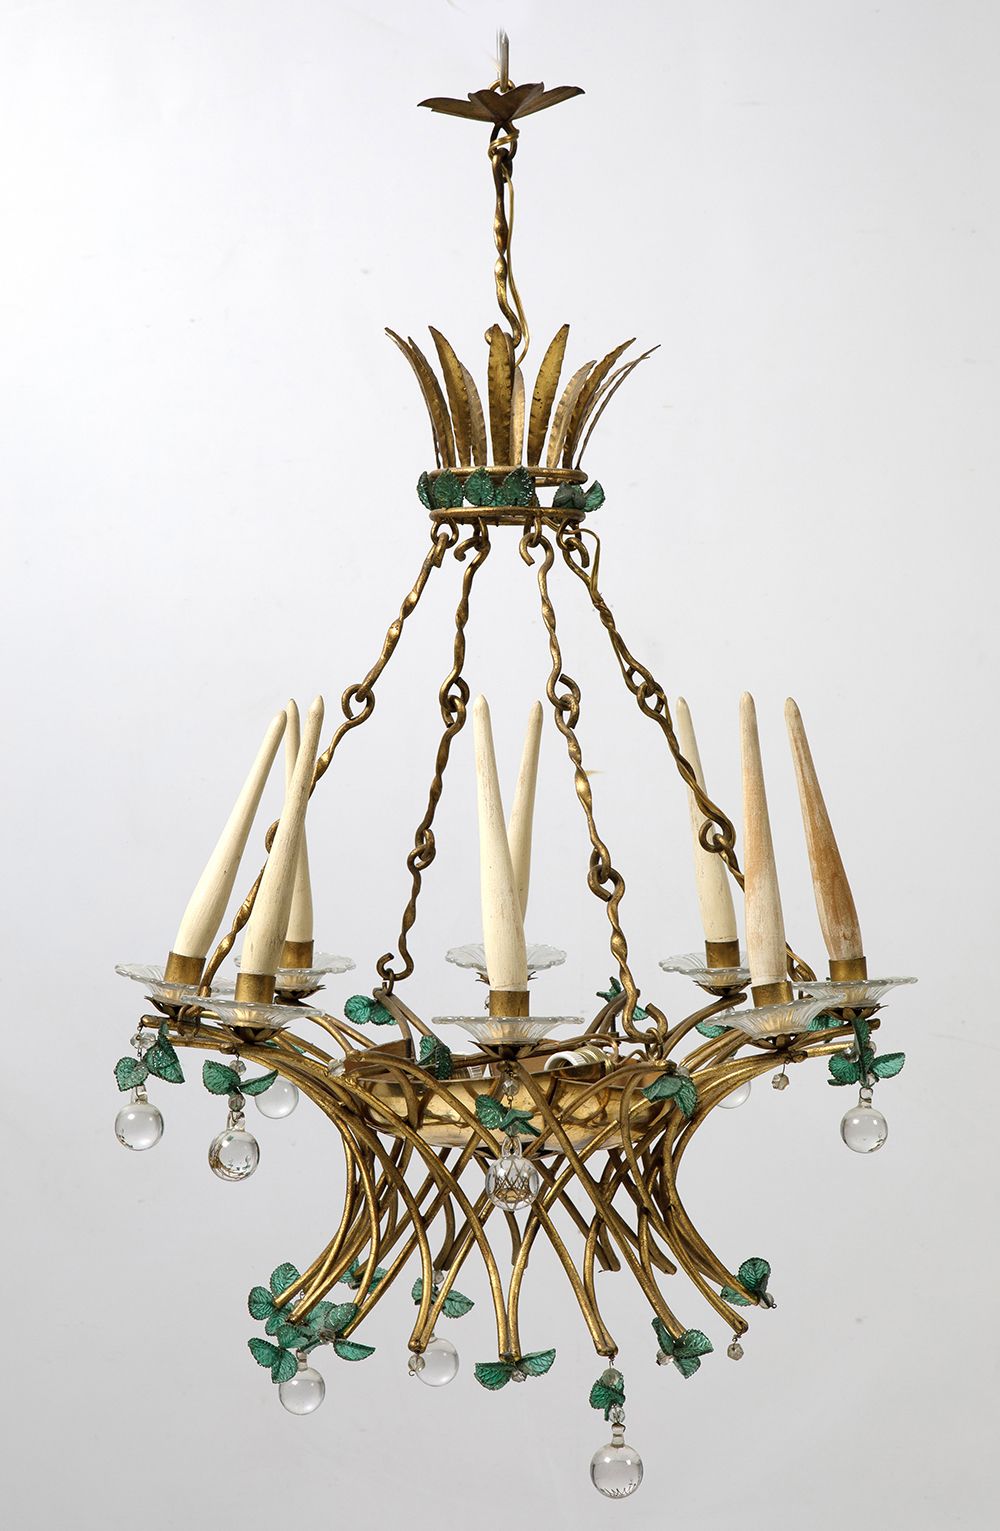 Ceiling lamp in gilded metal and glass beads, Spain, c.1960s 鎏金金属和玻璃珠的天花板灯，西班牙，约&hellip;